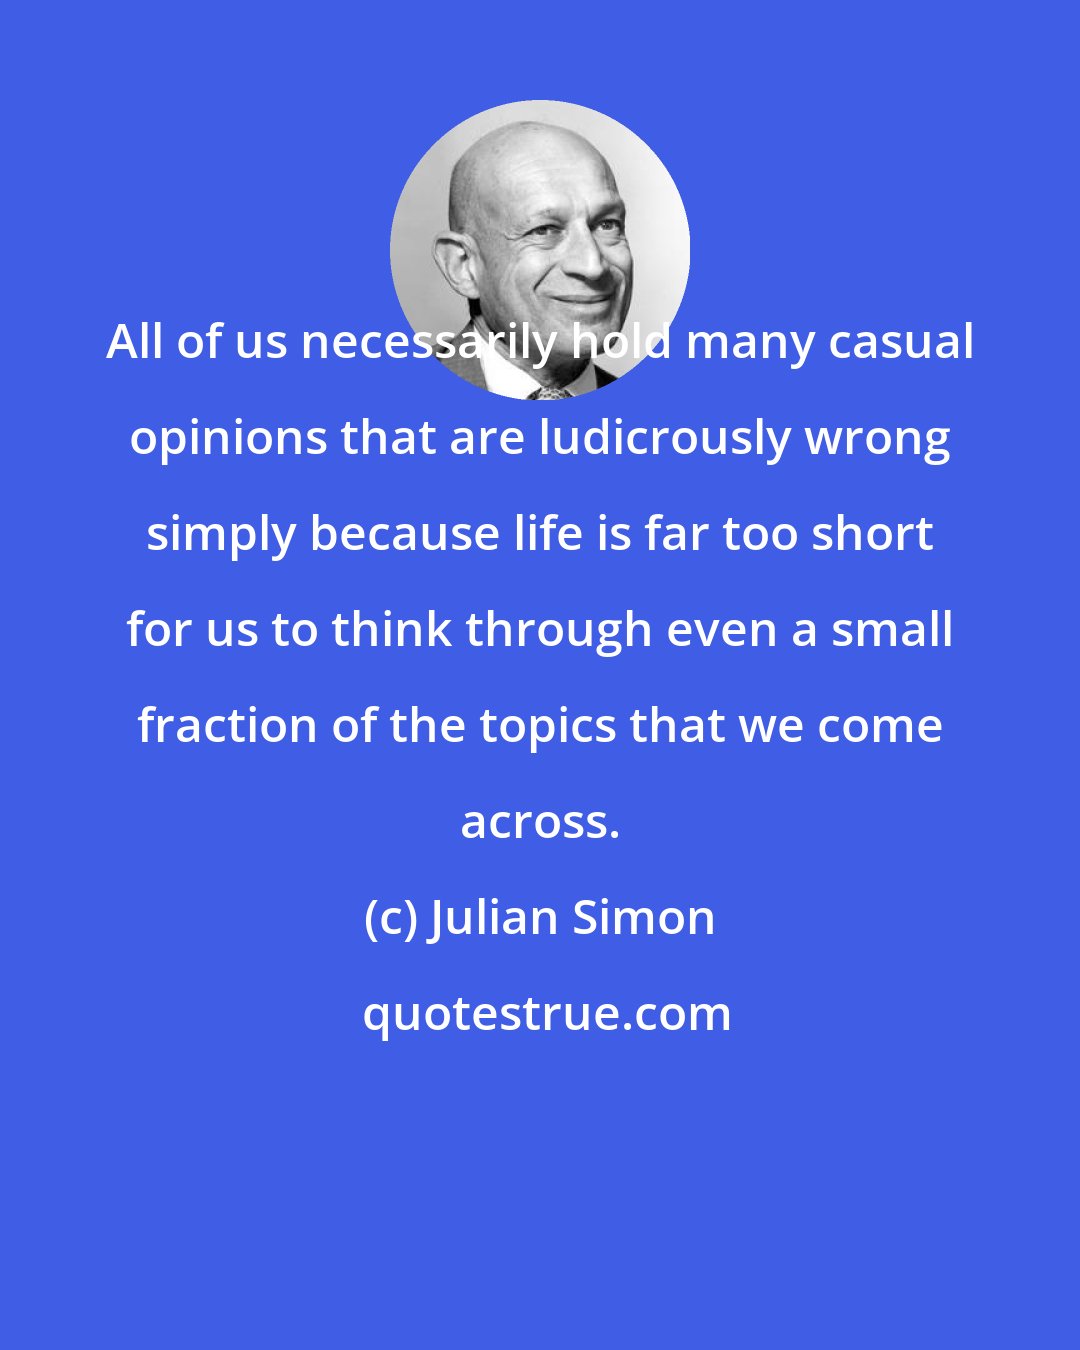 Julian Simon: All of us necessarily hold many casual opinions that are ludicrously wrong simply because life is far too short for us to think through even a small fraction of the topics that we come across.